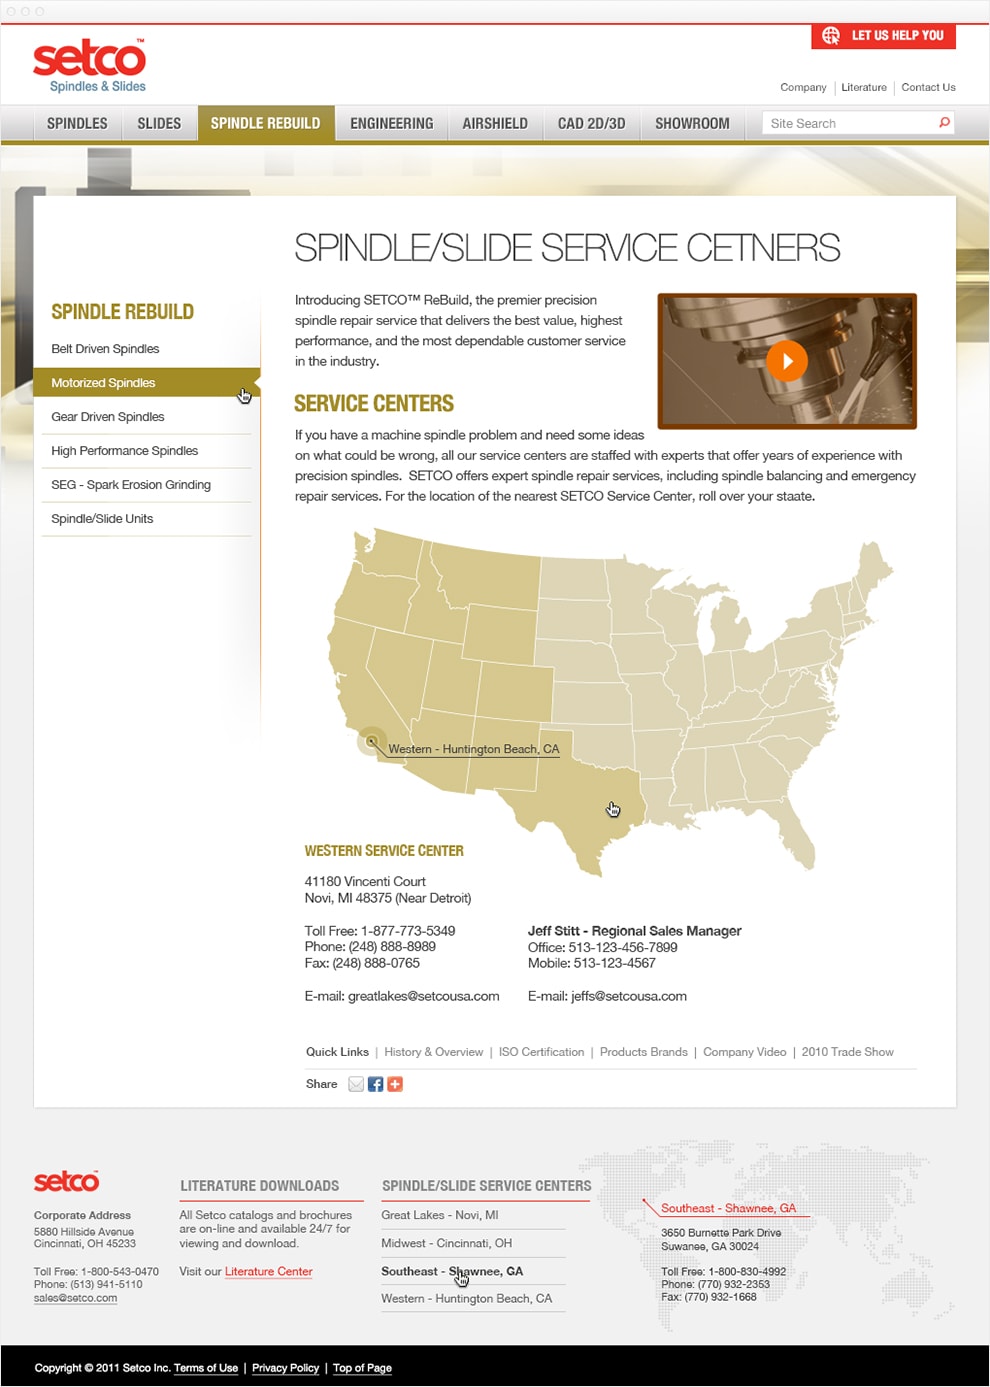 Screen capture of the service center page.